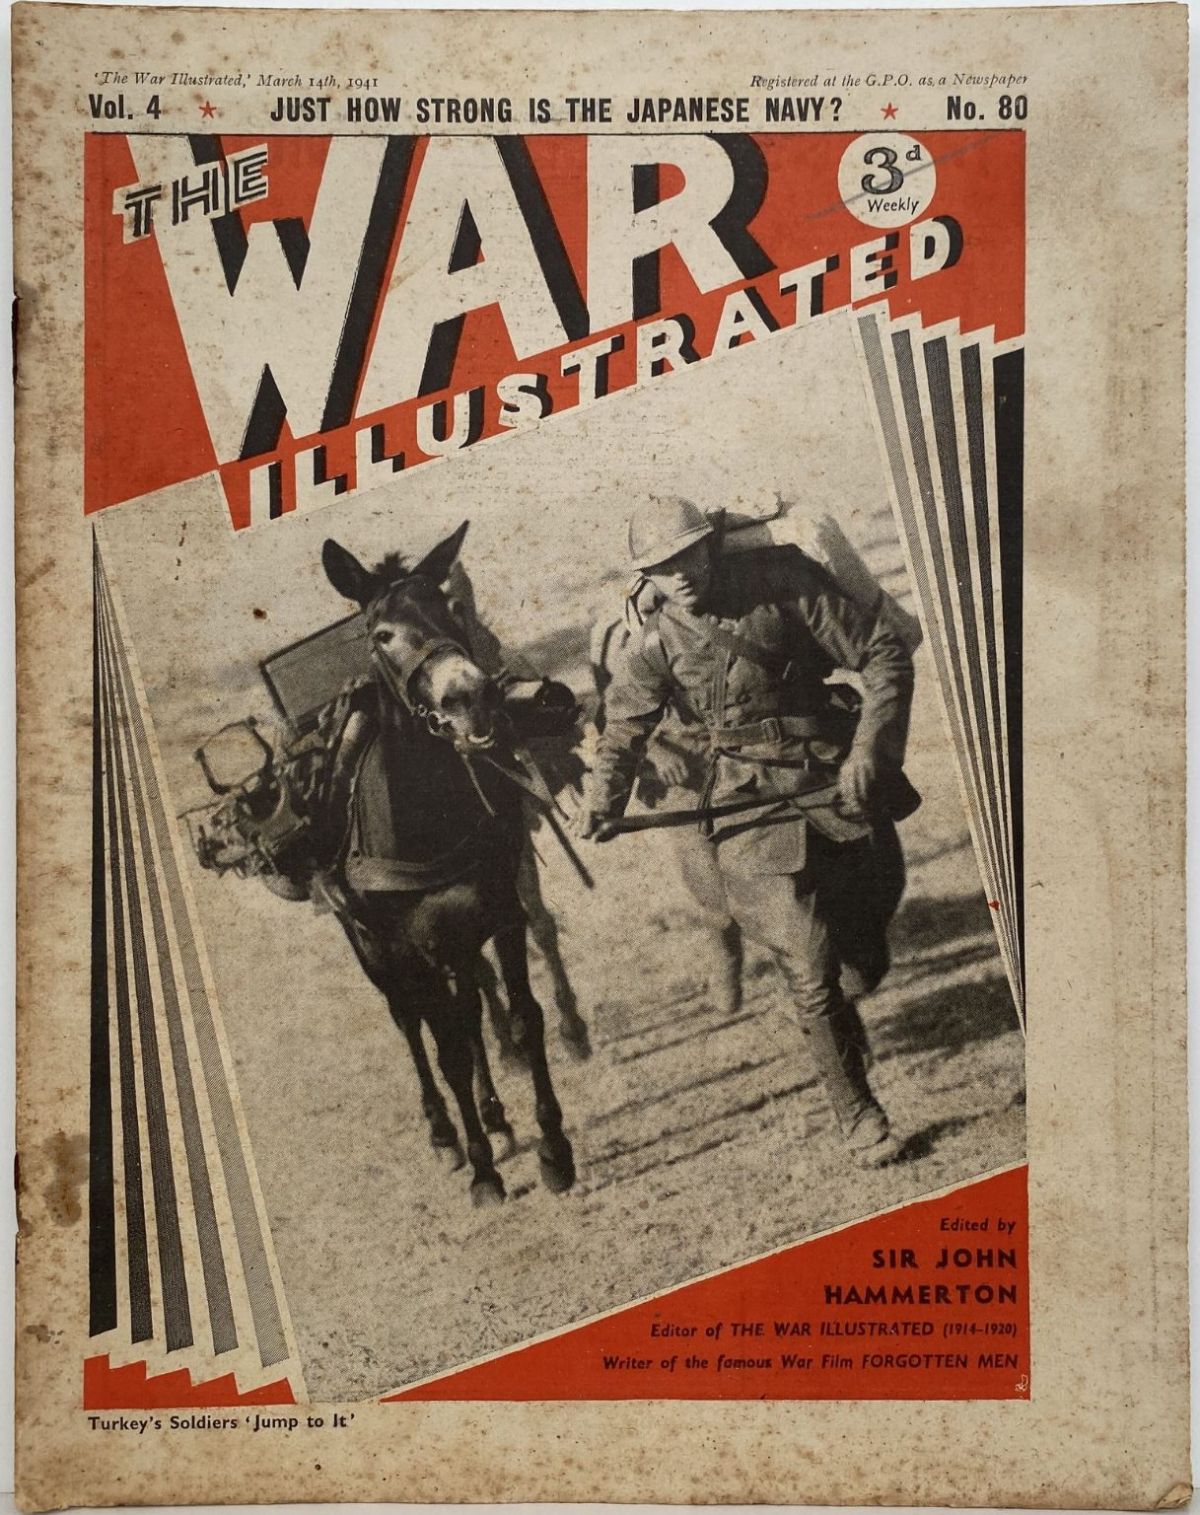 THE WAR ILLUSTRATED - Vol 4, No 80, 14th March 1941